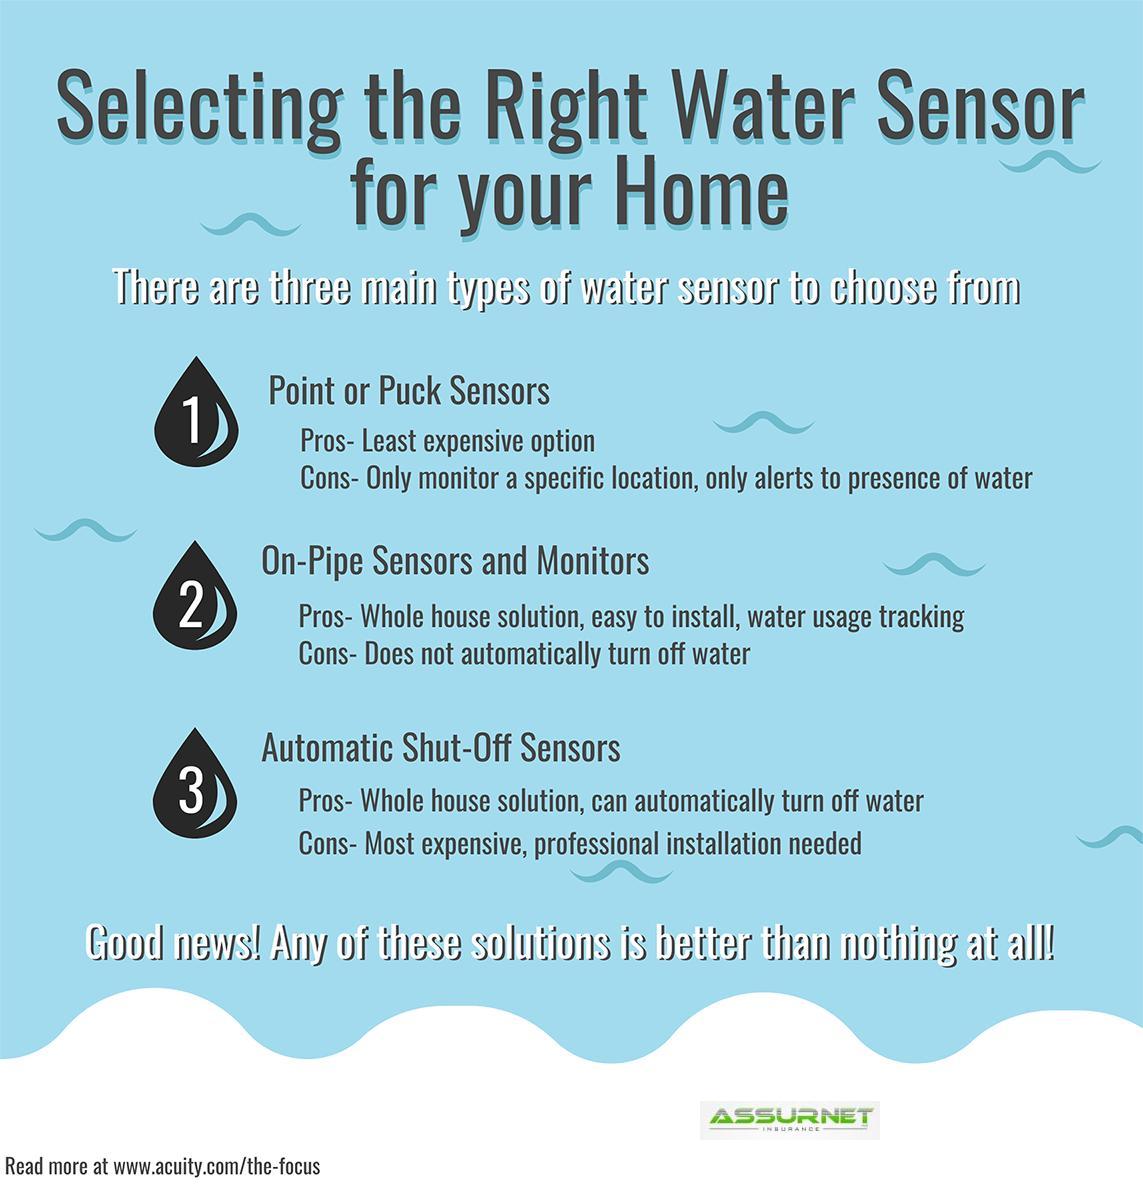 Selecting the Right Water Sensor for your home